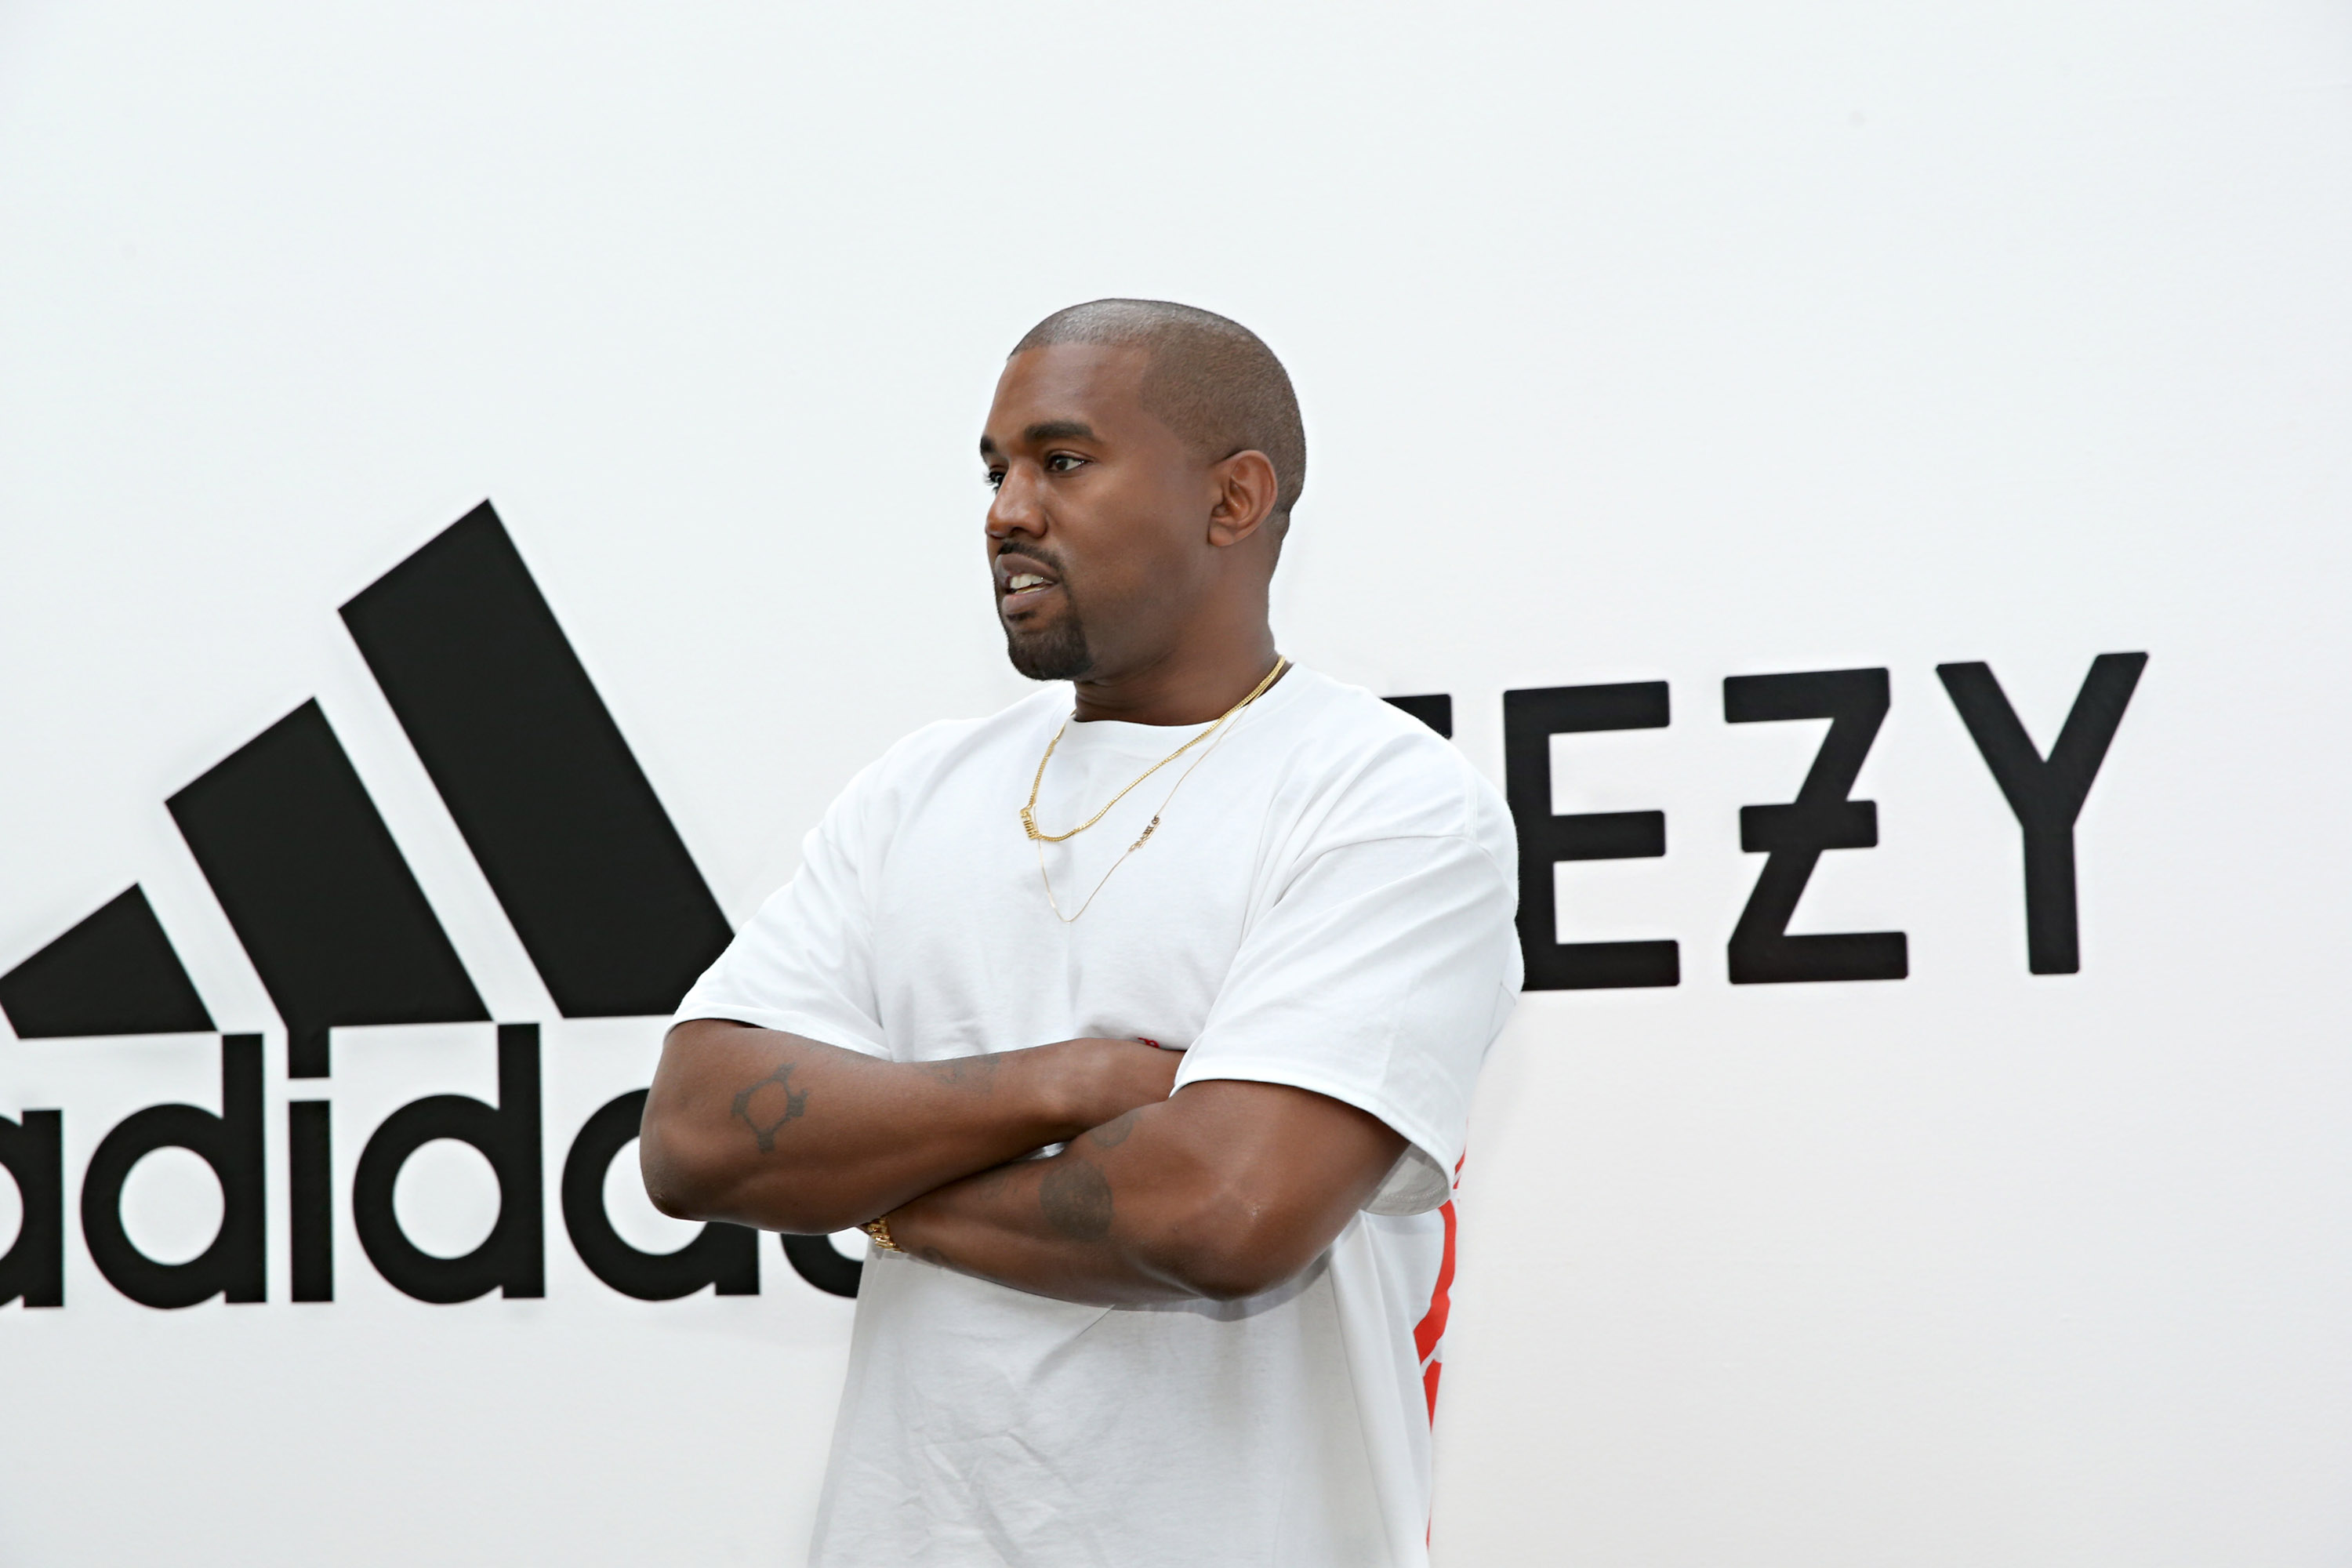 Adidas Hasn't Solved Its Yeezy Problem Since Kanye West Split - Bloomberg